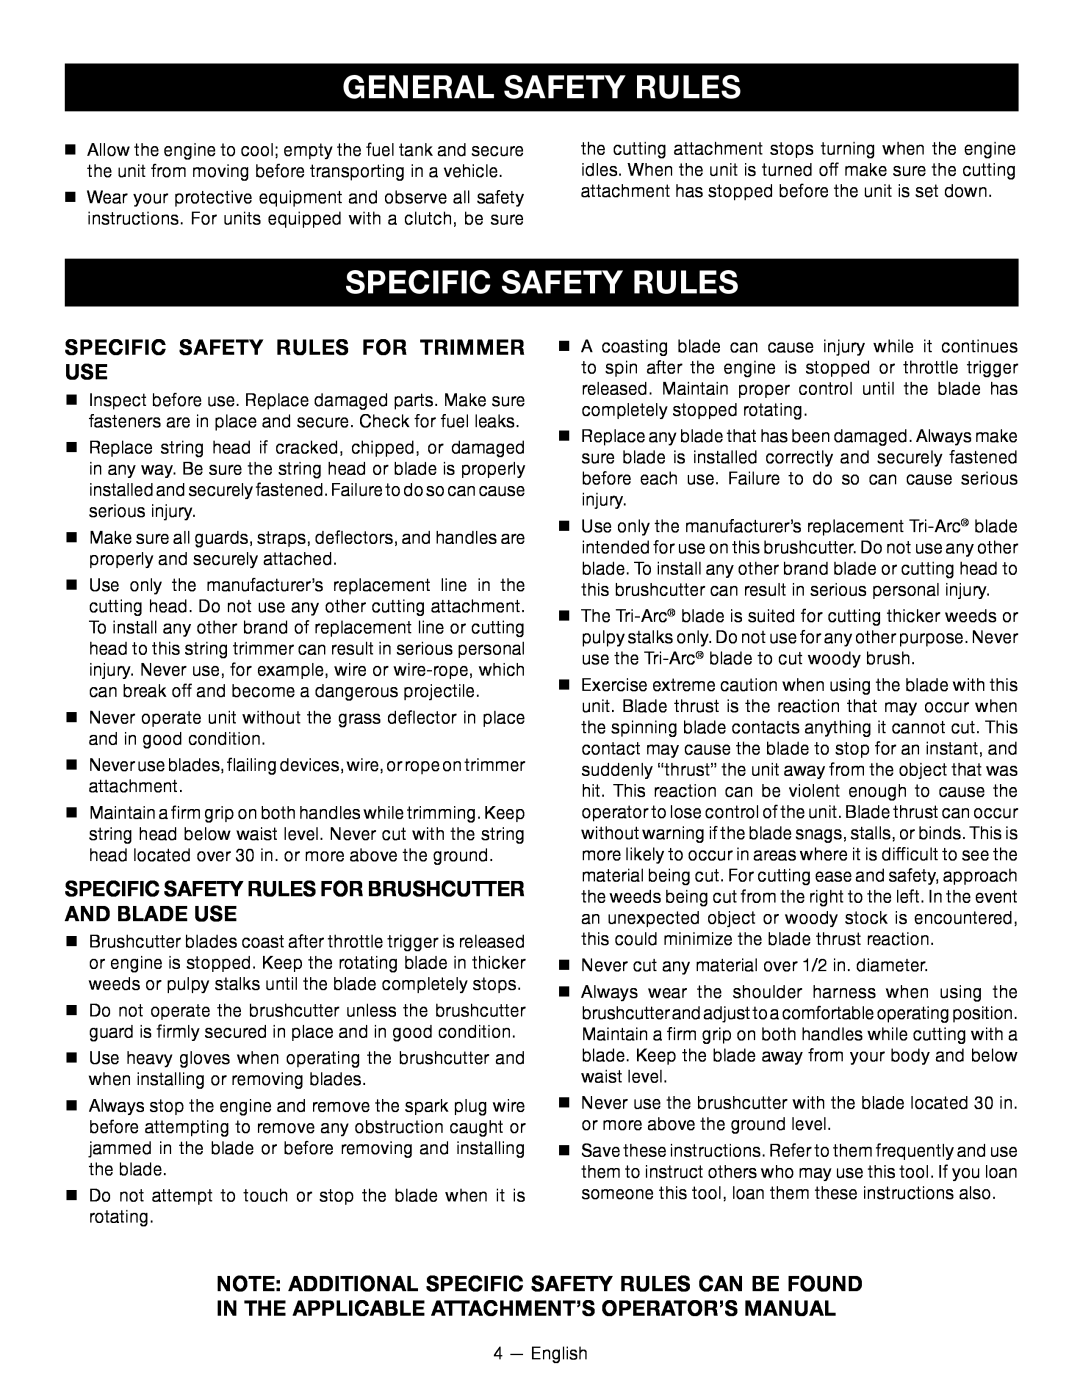 Ryobi RY34001 Specific Safety Rules For Trimmer Use, Specific Safety Rules For ­Brushcutter And Blade Use 